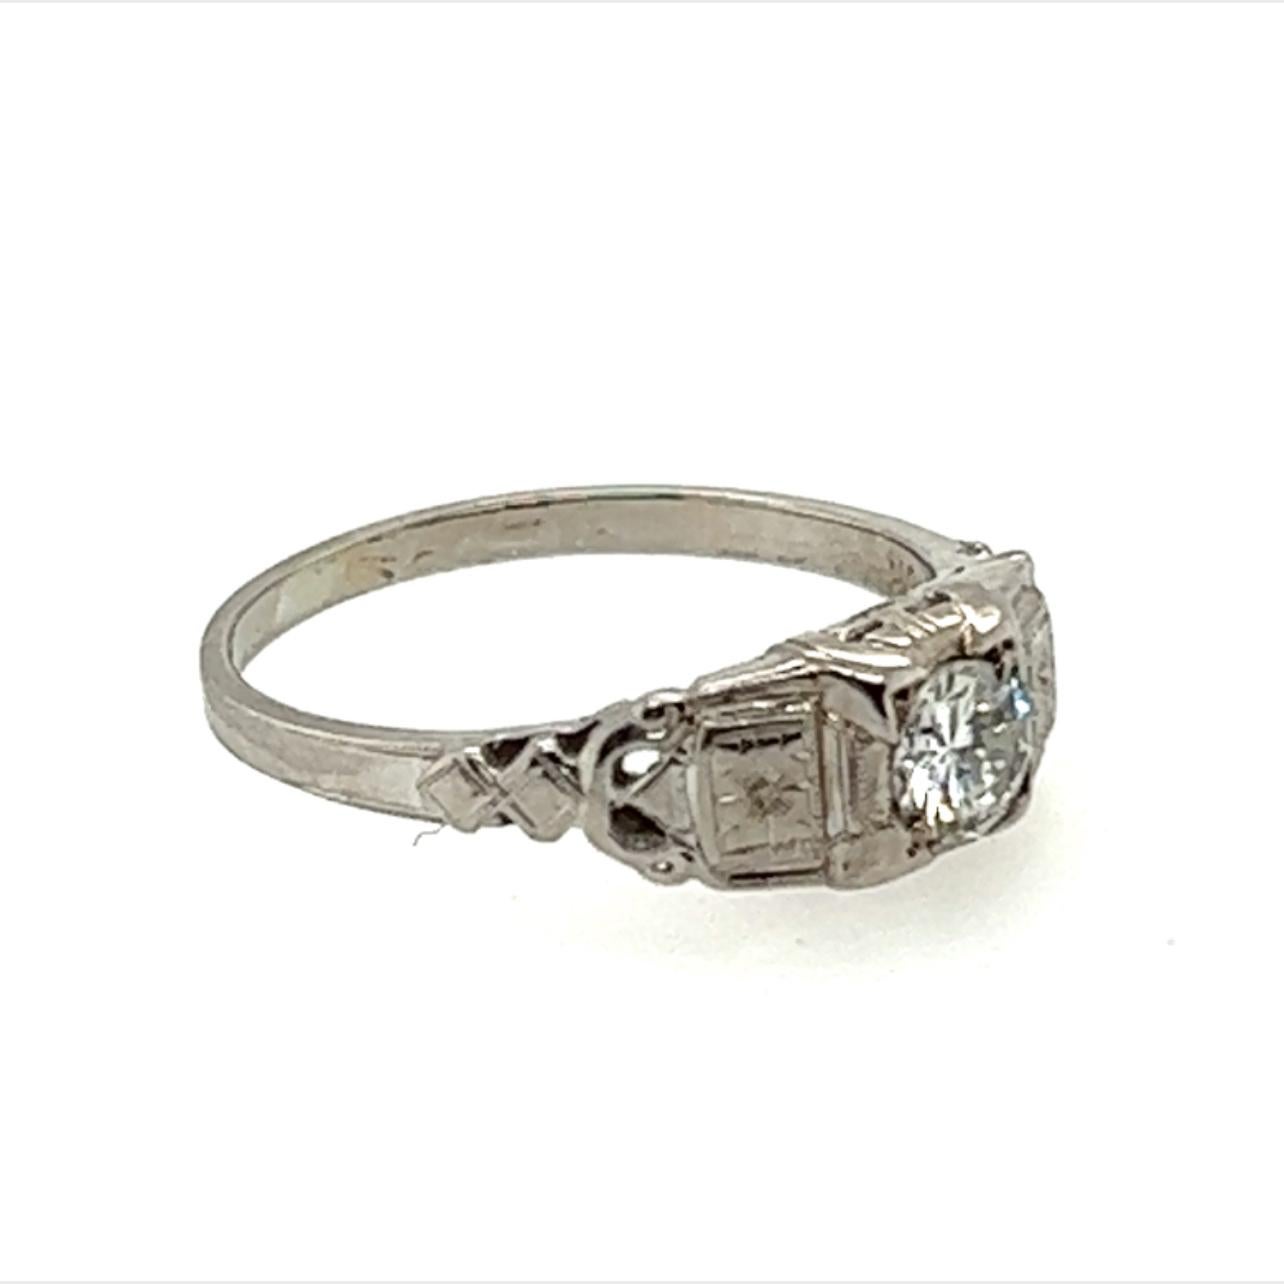 Genuine Original Art Deco Antique from 1940's Solitaire Diamond Engagement Ring .30ct Transitional Cut Antique 18K


Featuring a Beautiful Genuine .30ct F-G/VS Natural Mined Transitional Cut Diamond Center

Hand Engraved Flowers and Design 

Perfect